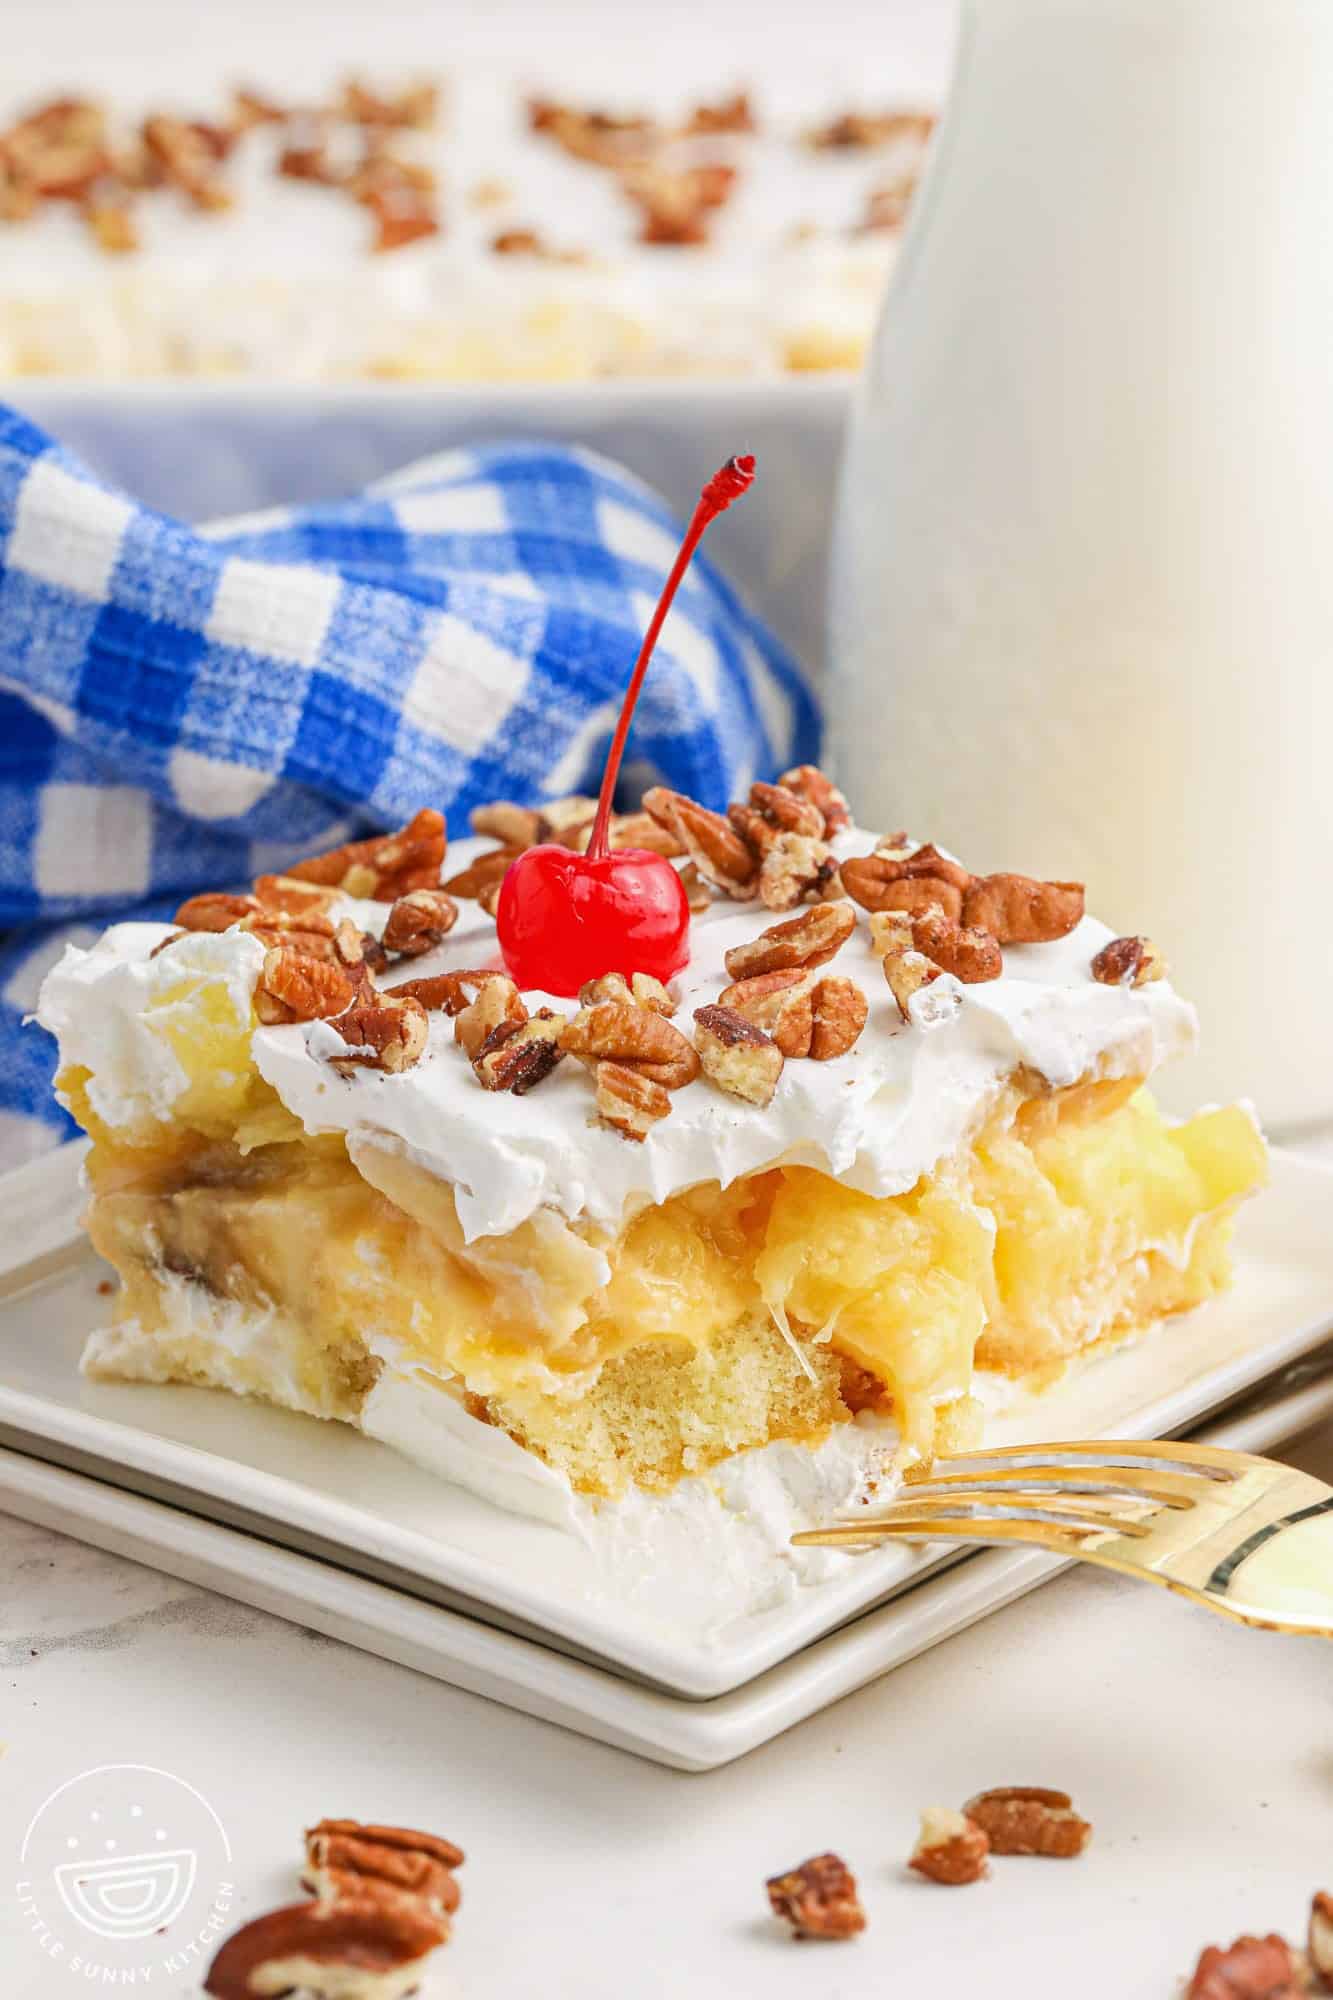 A slice of a no bake twinkie cake topped with whipped topping, pecan pieces, and a maraschino cherry. Served on a square white plate and a golden fork on the side.